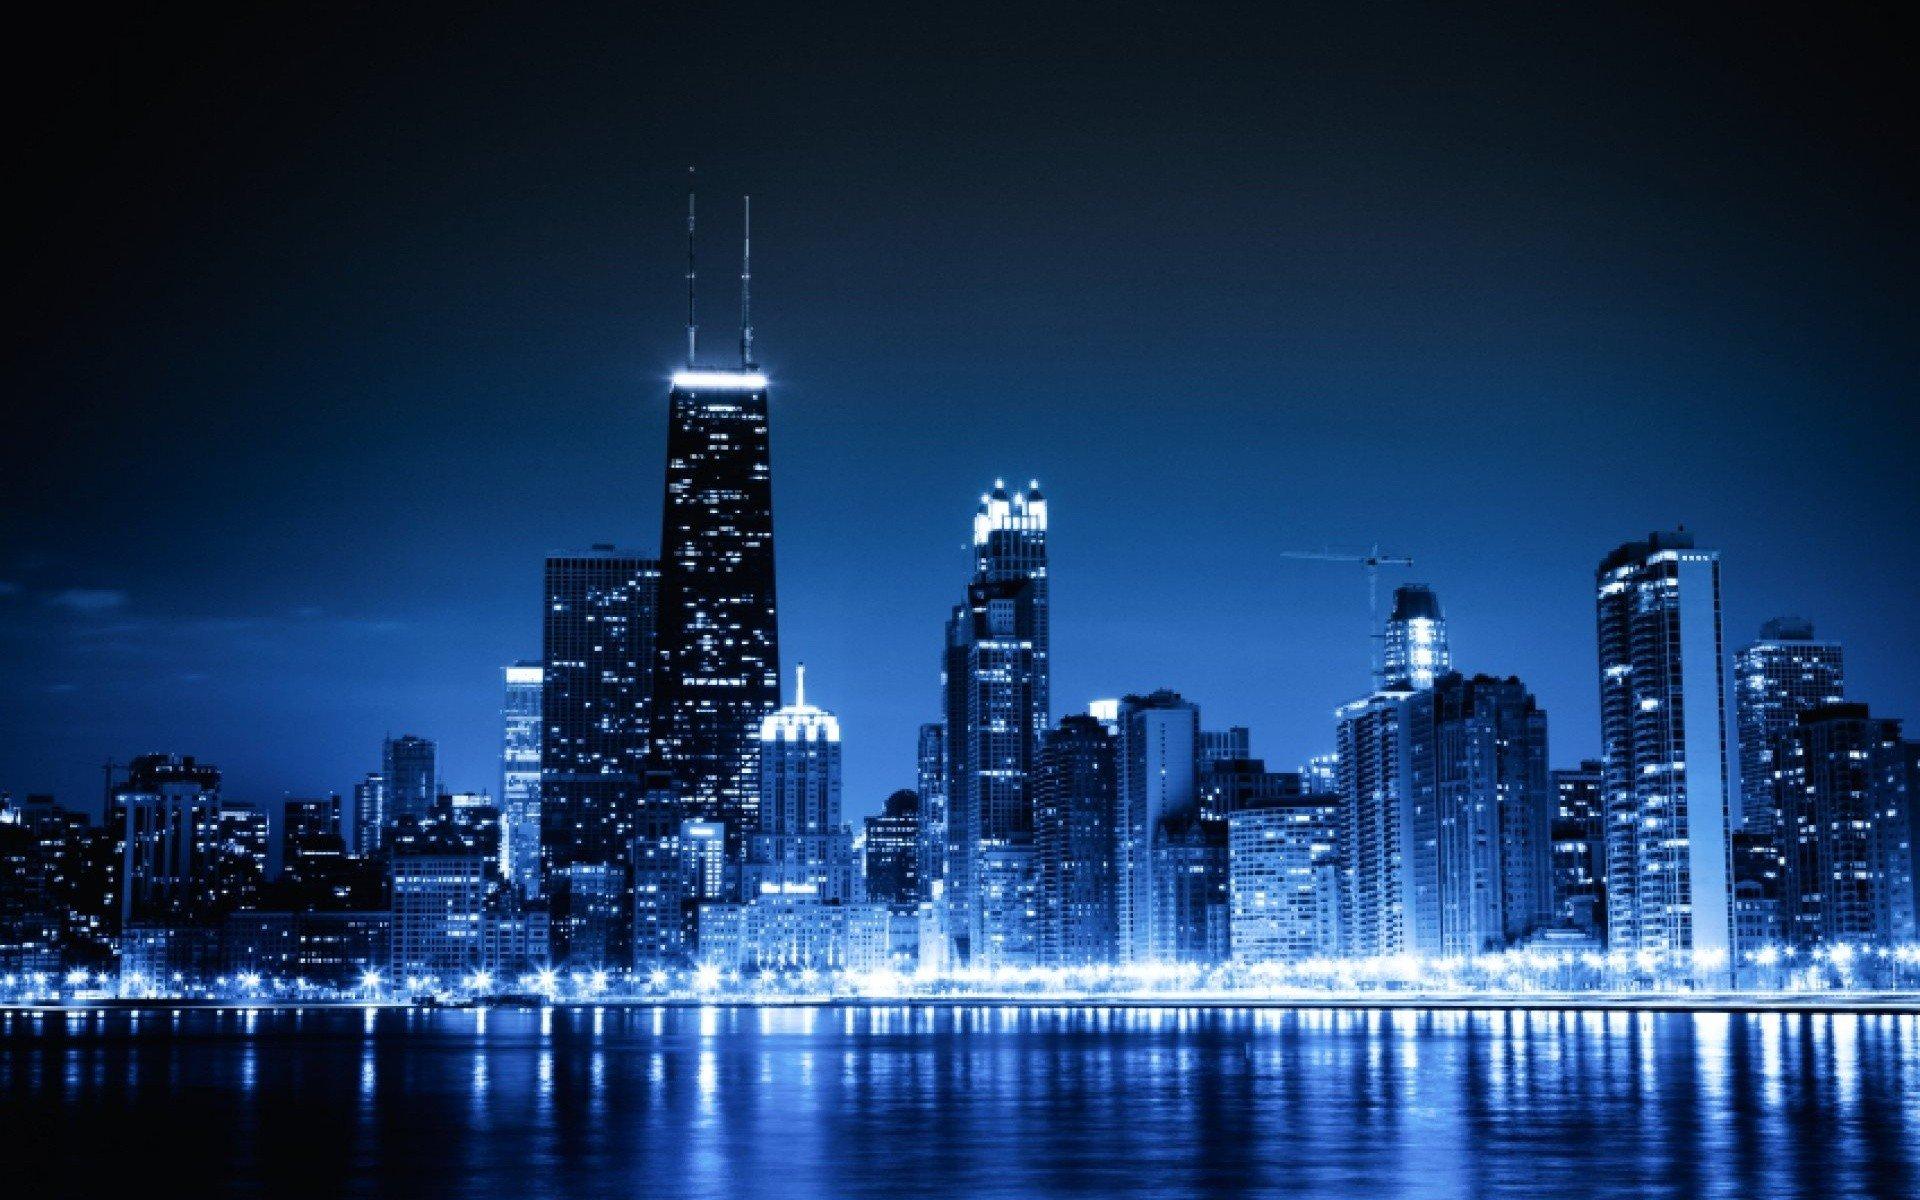 Download 1920x1200 blue cityscapes Chicago night lights urban.